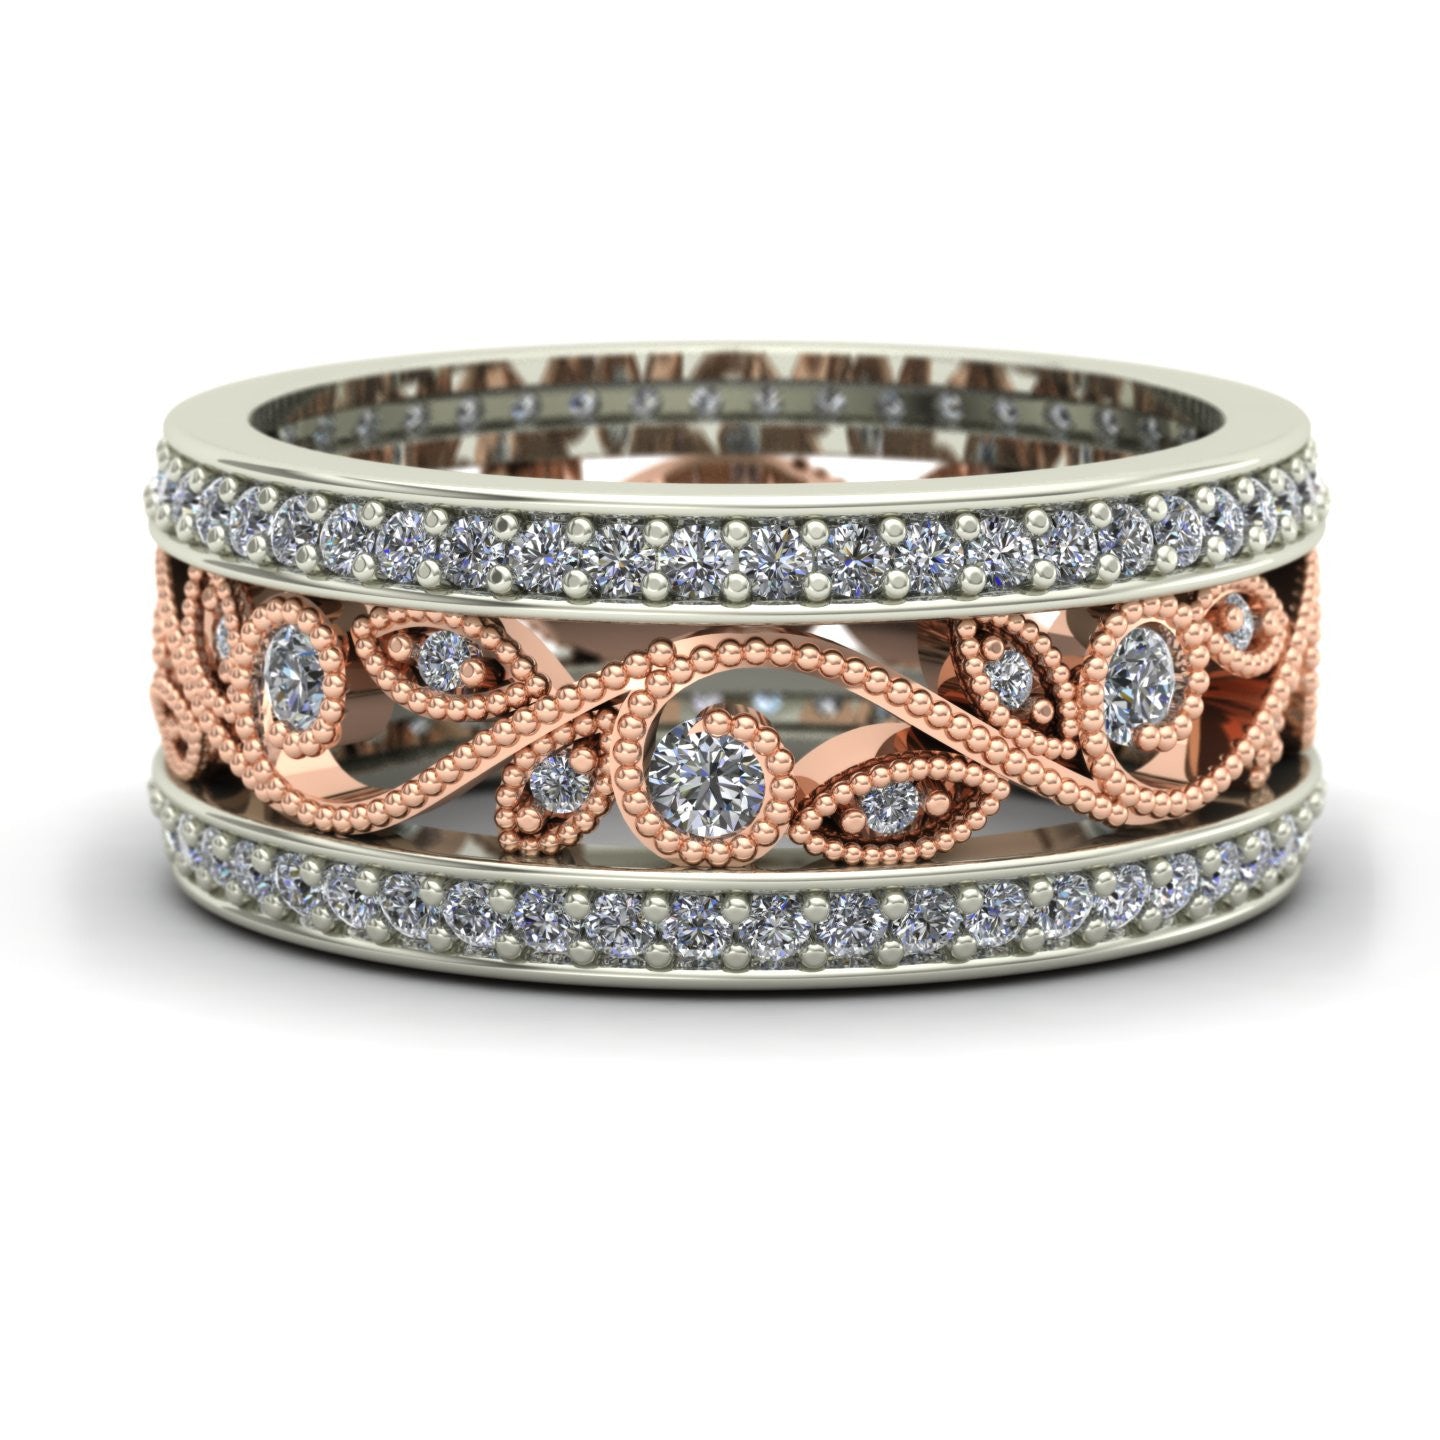 Diamond floral wedding band two tone leaf vine in 14k rose and white gold - Charles Babb Designs - top view